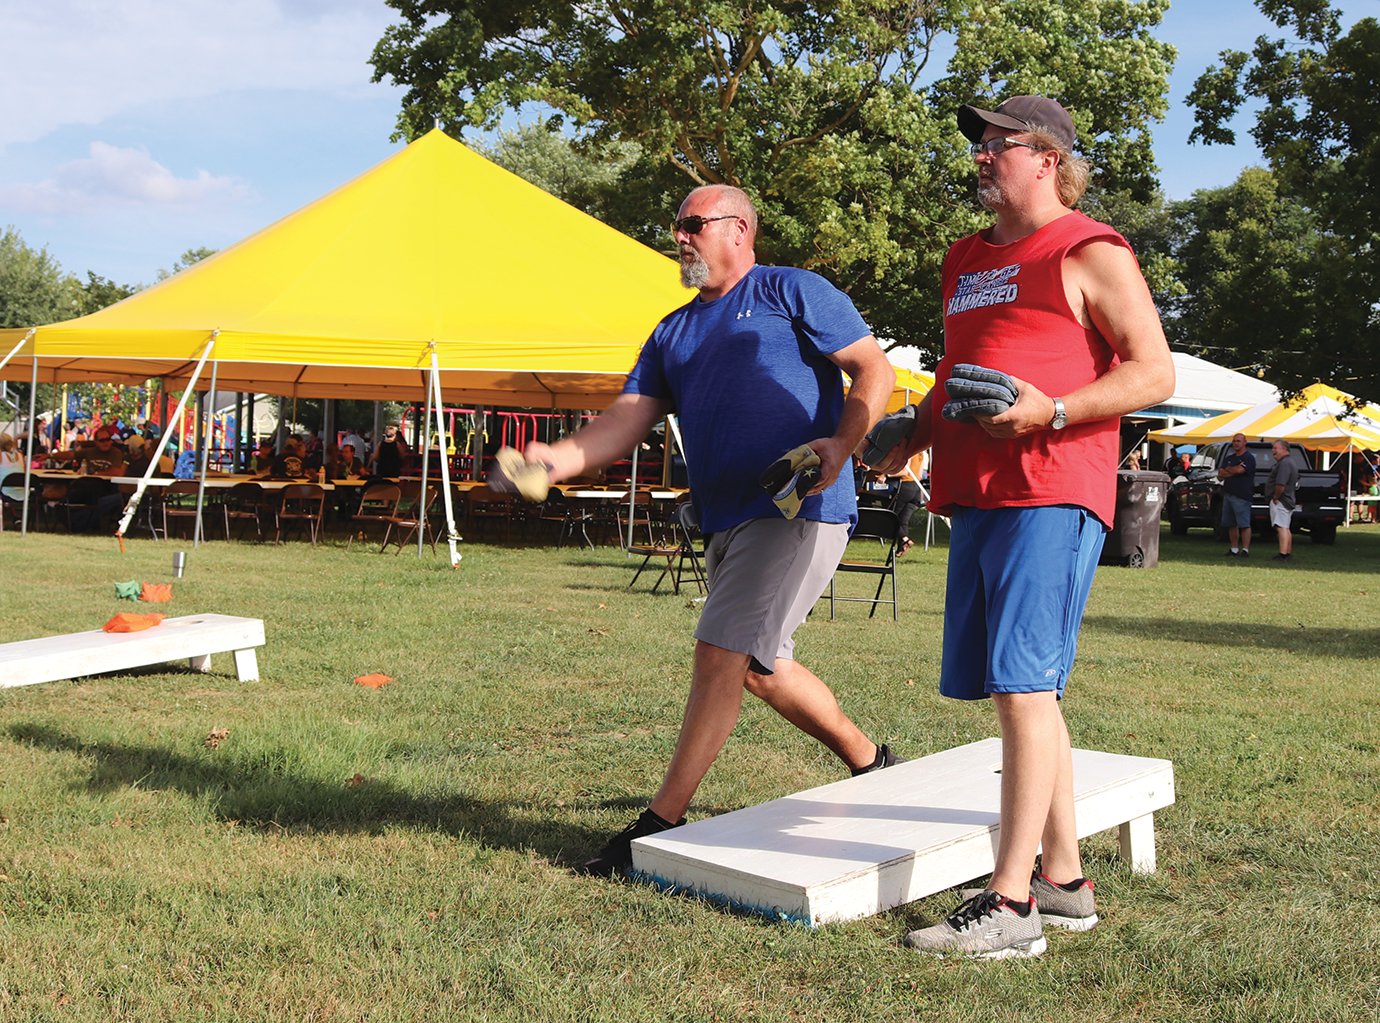 Rich Mesaros, left, and Larry McKinsey take turns throwing Saturday during a cornhole tournament at the Darren Forman Fundraiser in Waynetown. The event at Tremaine Park was created to benefit Montgomery County Coroner and Crawfordsville firefighter Darren Forman, who was seriously injured in July.